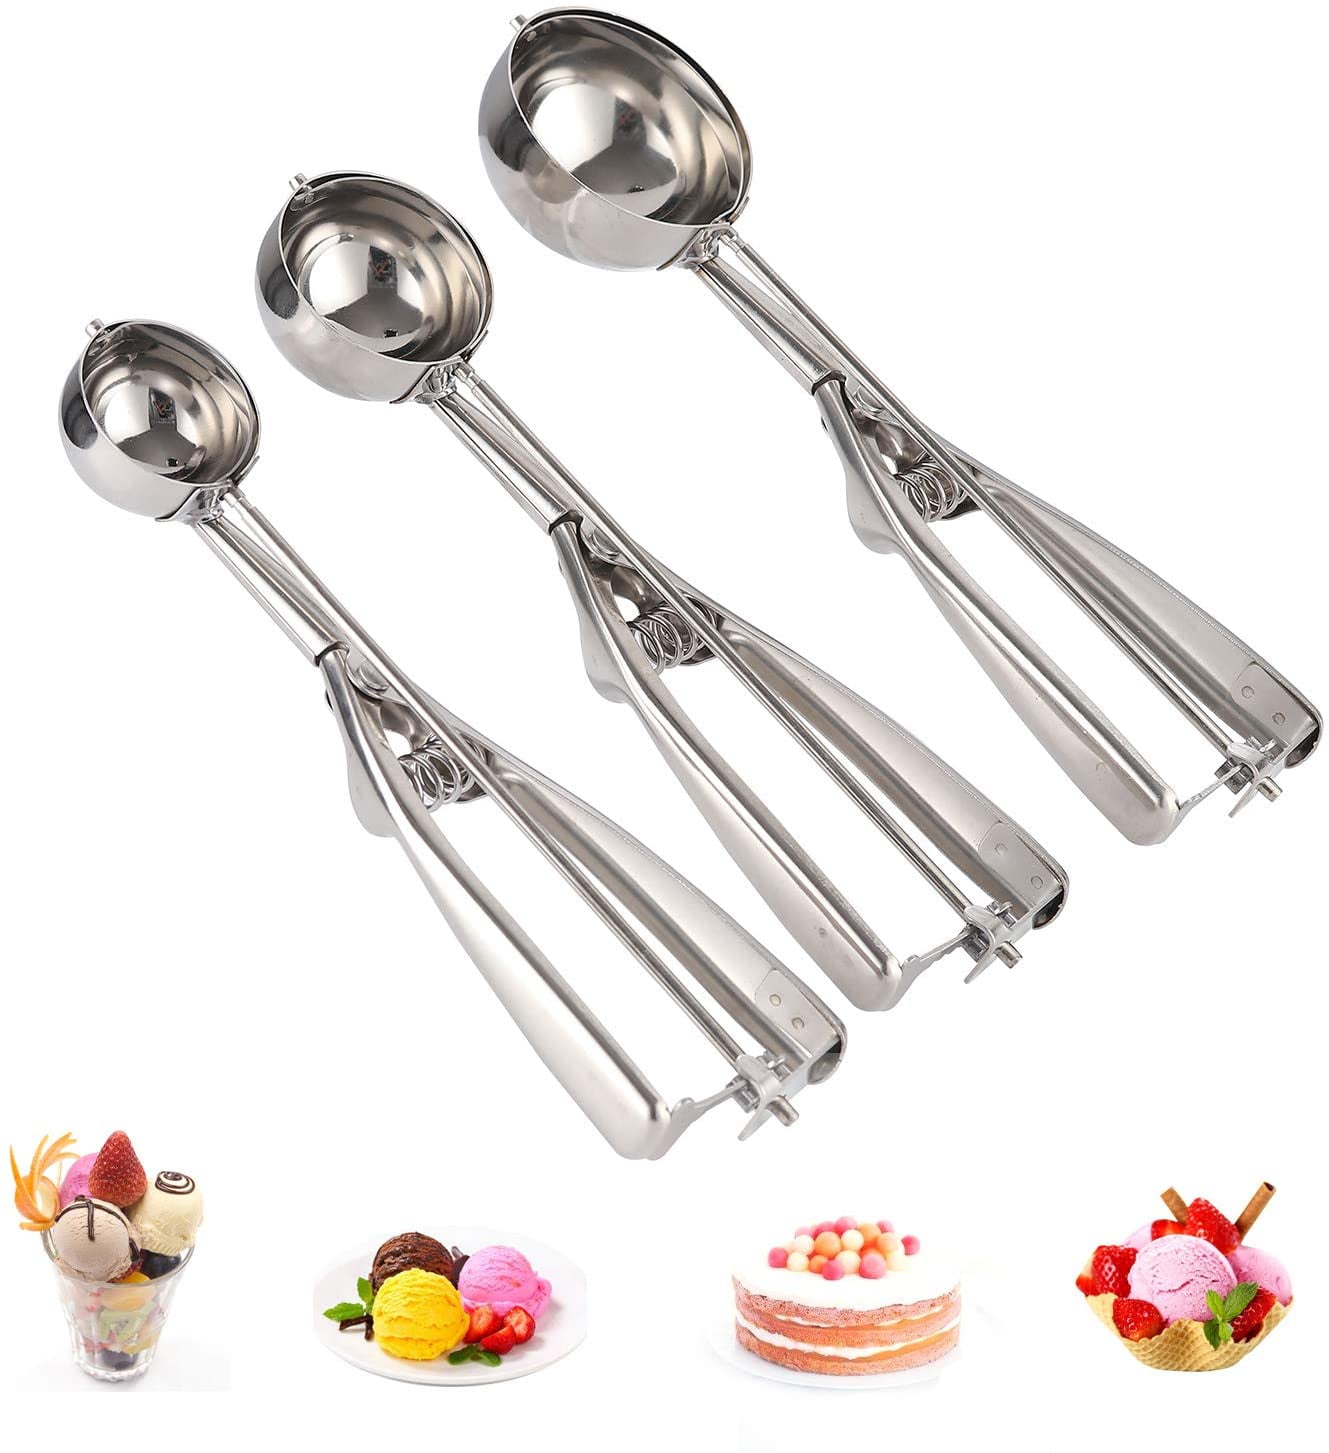 Cookie Dough Metal Cupcake Spoons Include Large-Medium-Small Sizes Balls for Meatball Muffin Melon MOTYYA Ice Cream Scoops Set of 3,Stainless Steel Cookie Scooper with Trigger Release